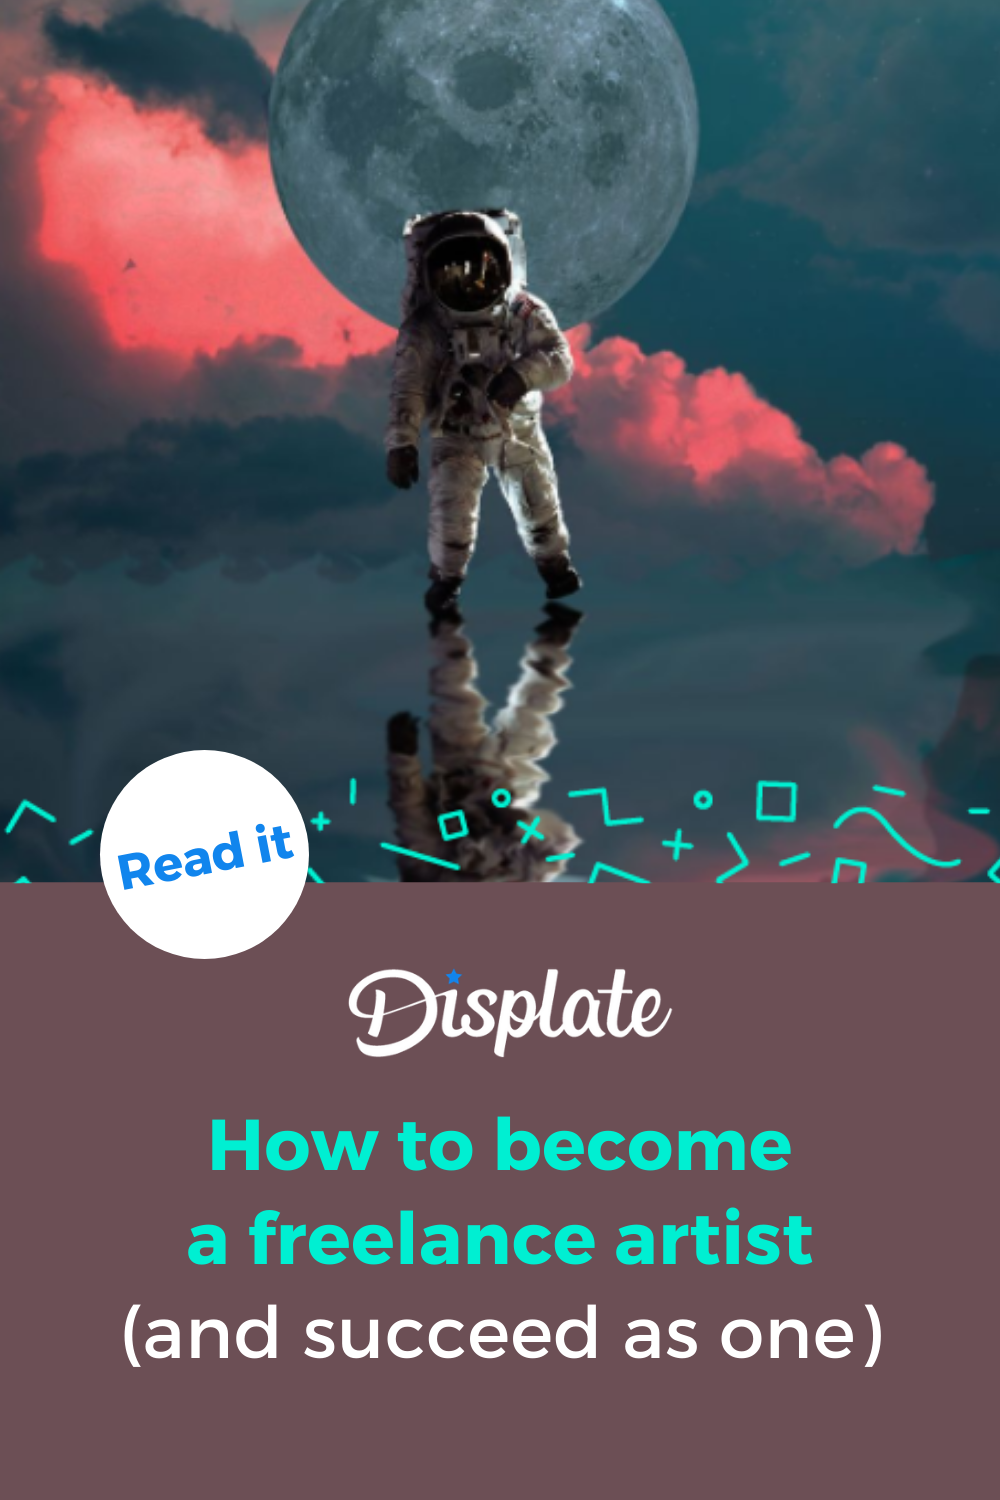 How To Work and Succeed as Freelance Artist in 2022 | Displate Blog